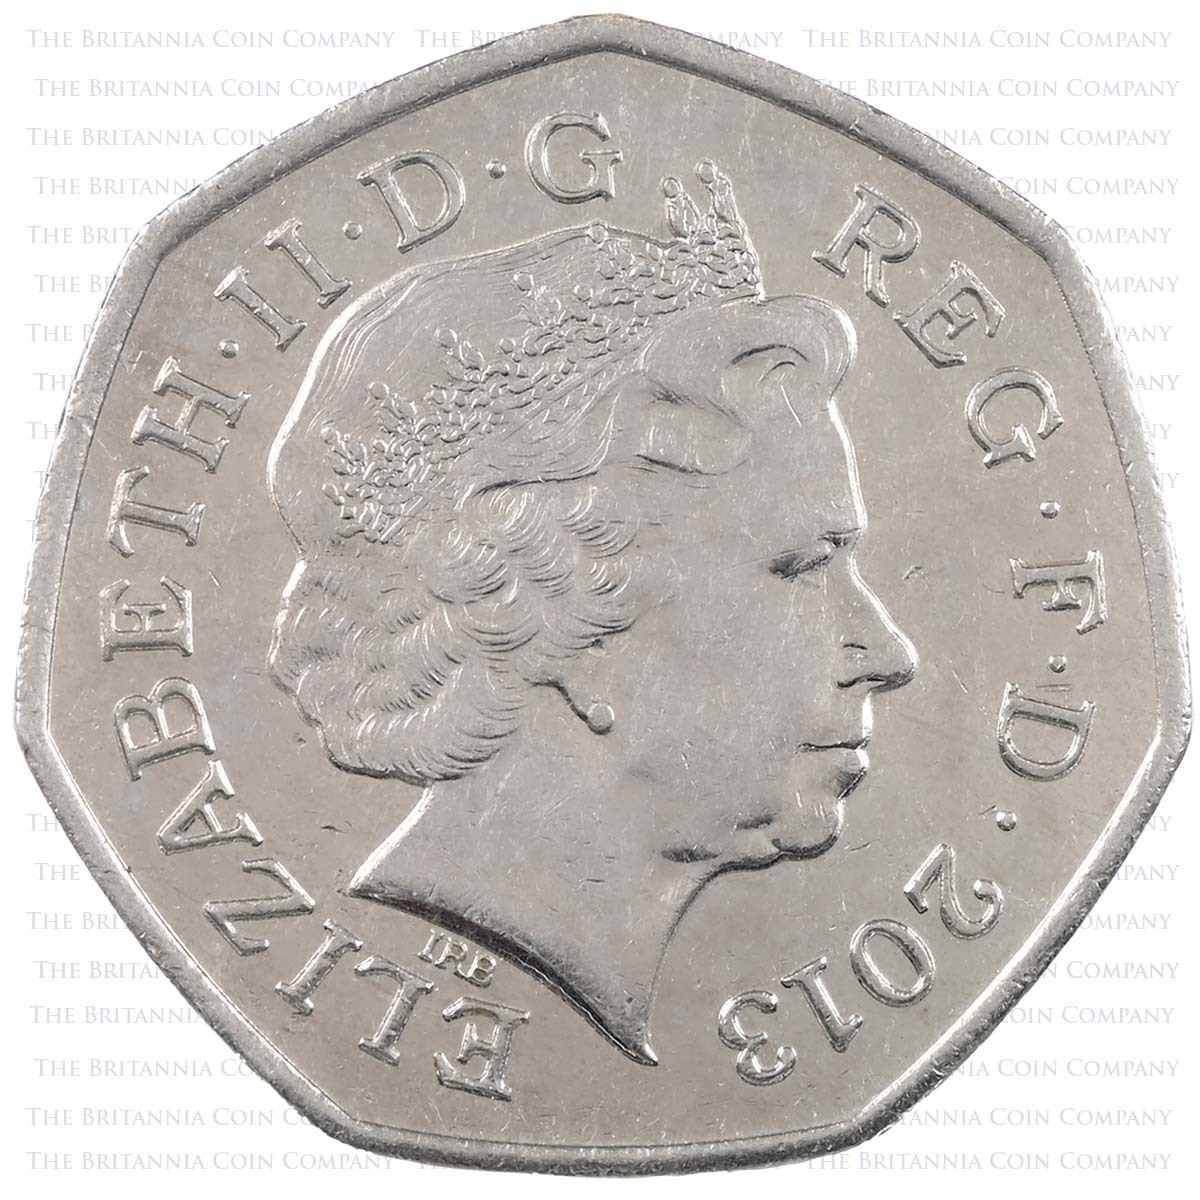 2013 Christopher Ironside Royal Arms Circulated Fifty Pence Coin Obverse